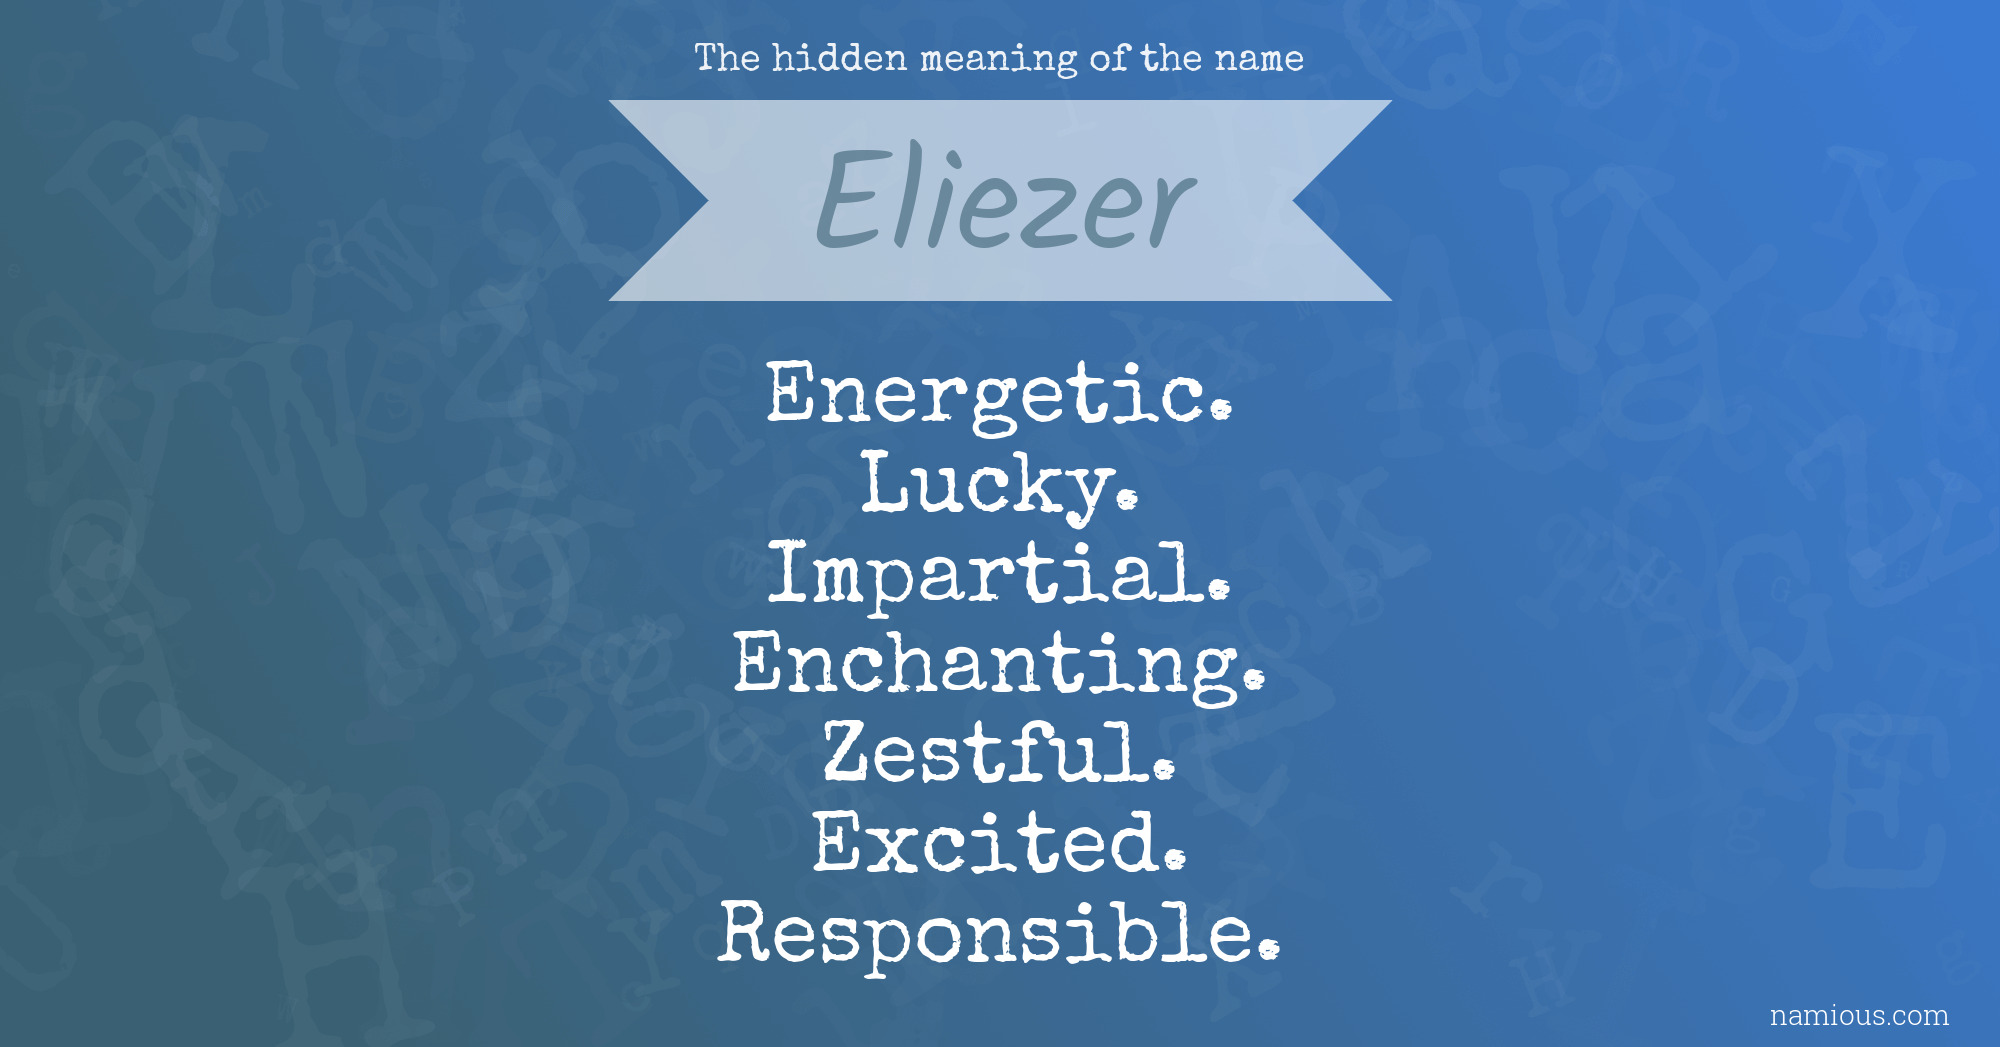 The hidden meaning of the name Eliezer